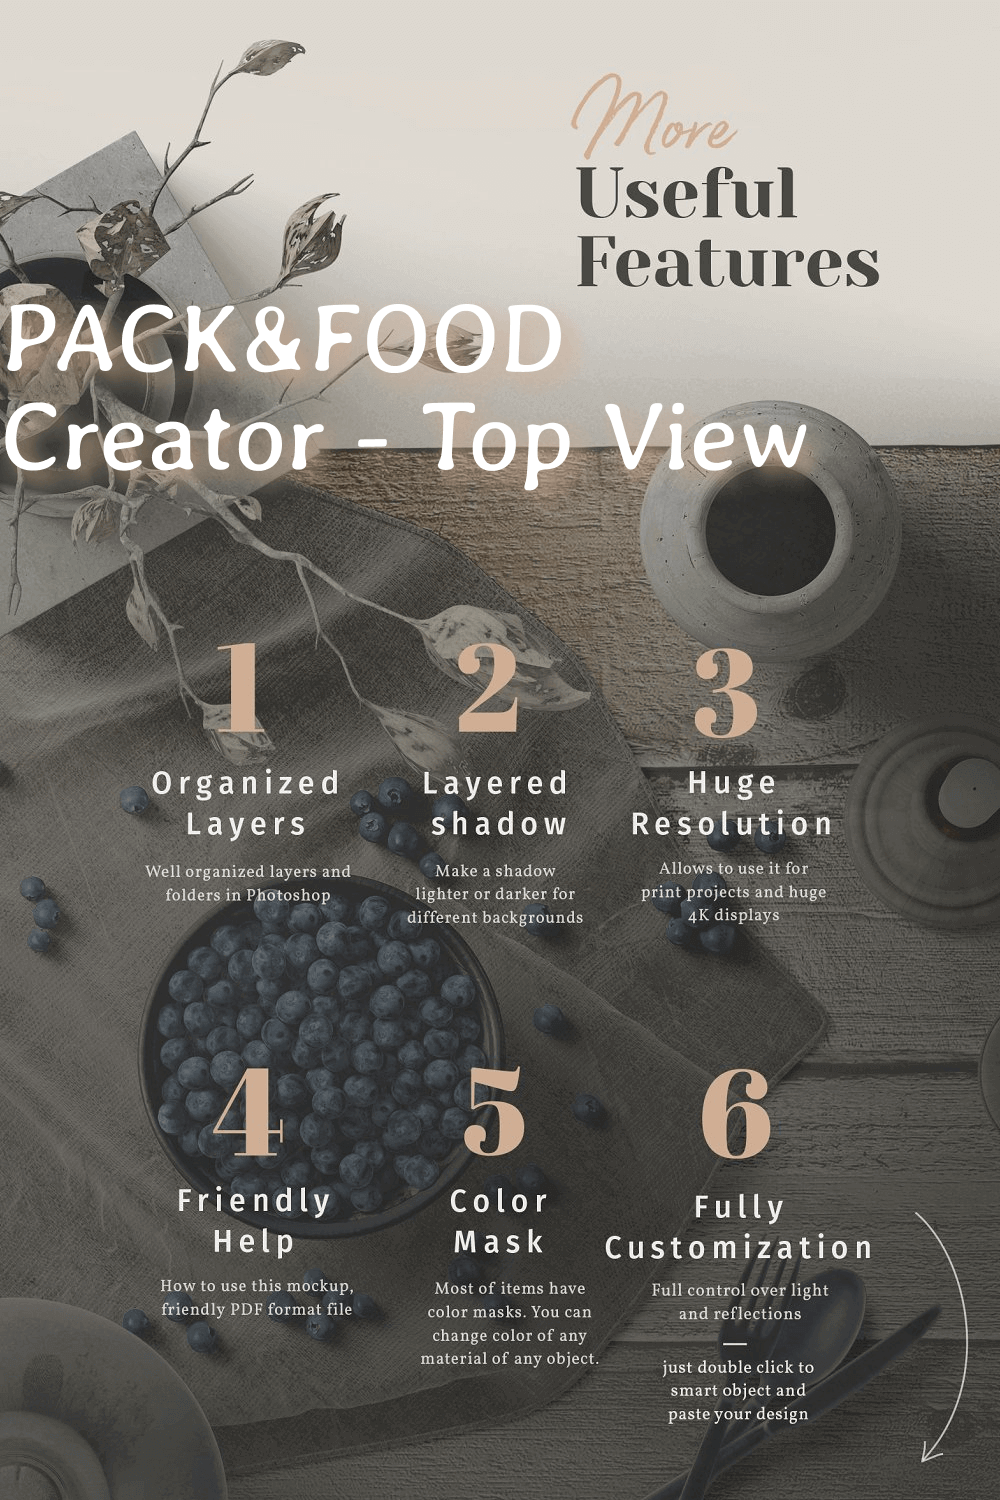 Organized Layers, Layered Shadow, Huge Resolution, Color Mask, Help, Fully Customization in PACK&FOOD Creator - top view.